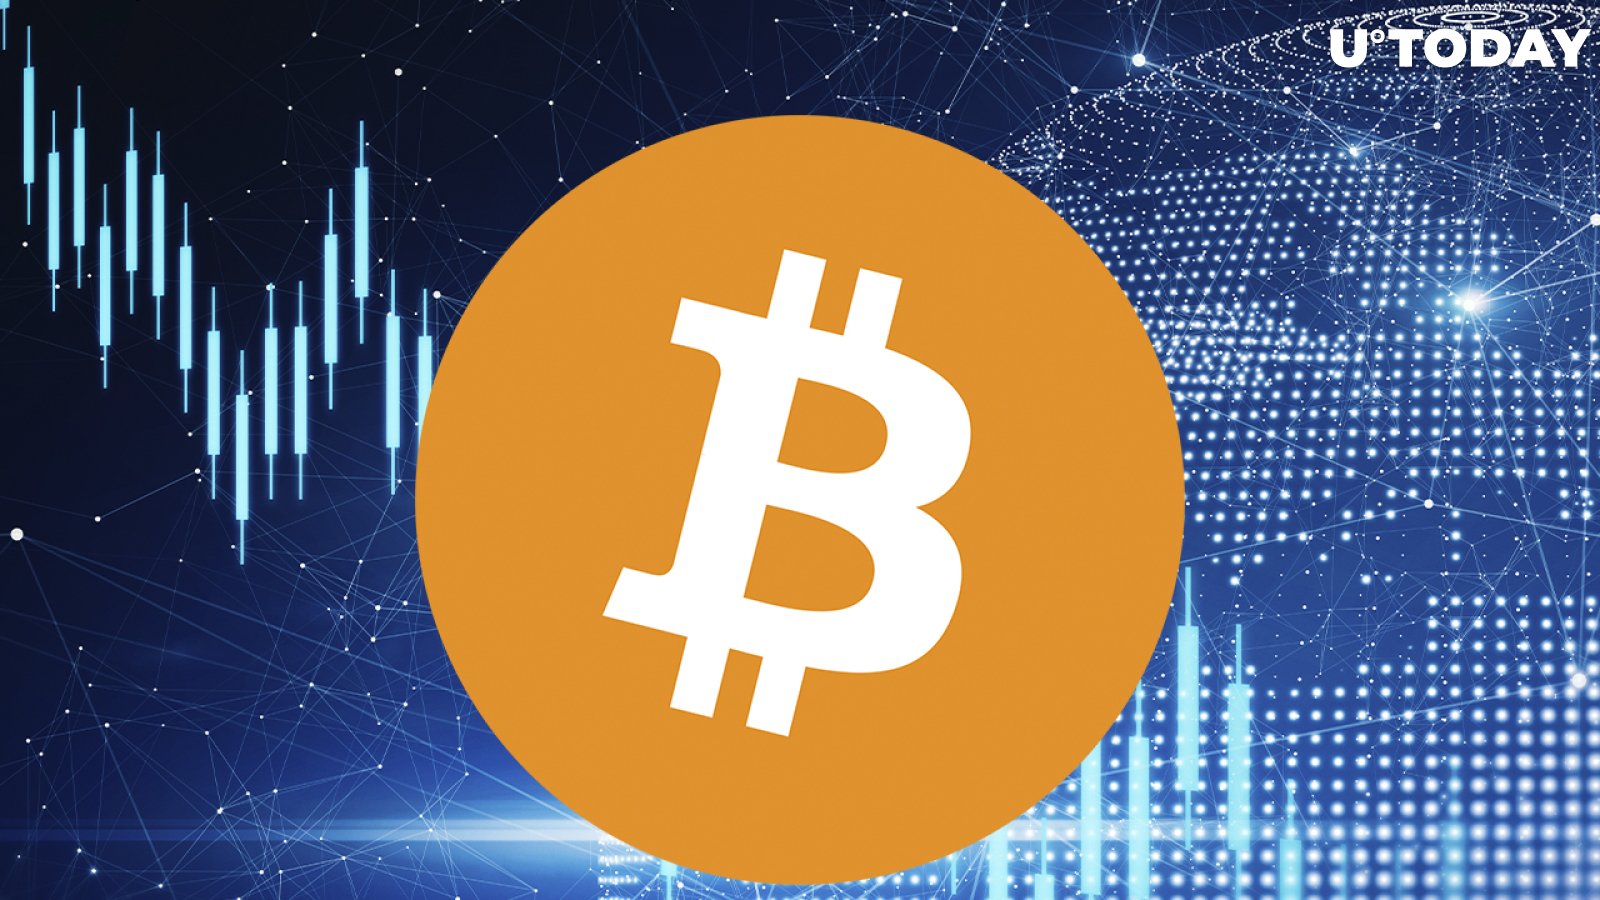 Here's Who Is Pushing Bitcoin (BTC) Price Down: Glassnode Data